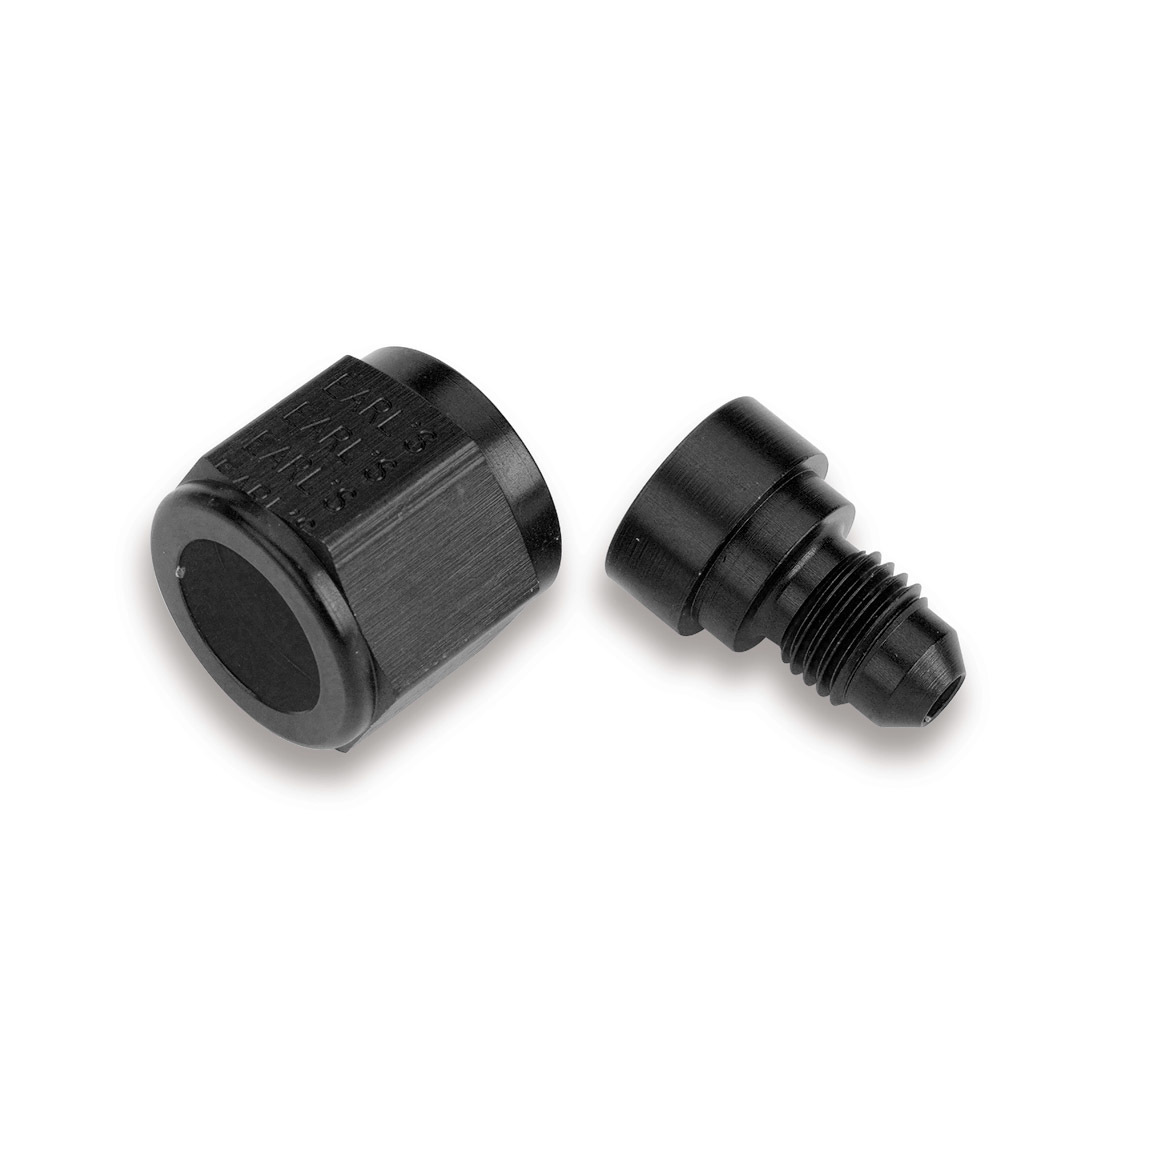 Earls AT9892126ERL Fitting, Adapter, Straight, 12 AN Female to 6 AN Male, Aluminum, Black Anodized, Each